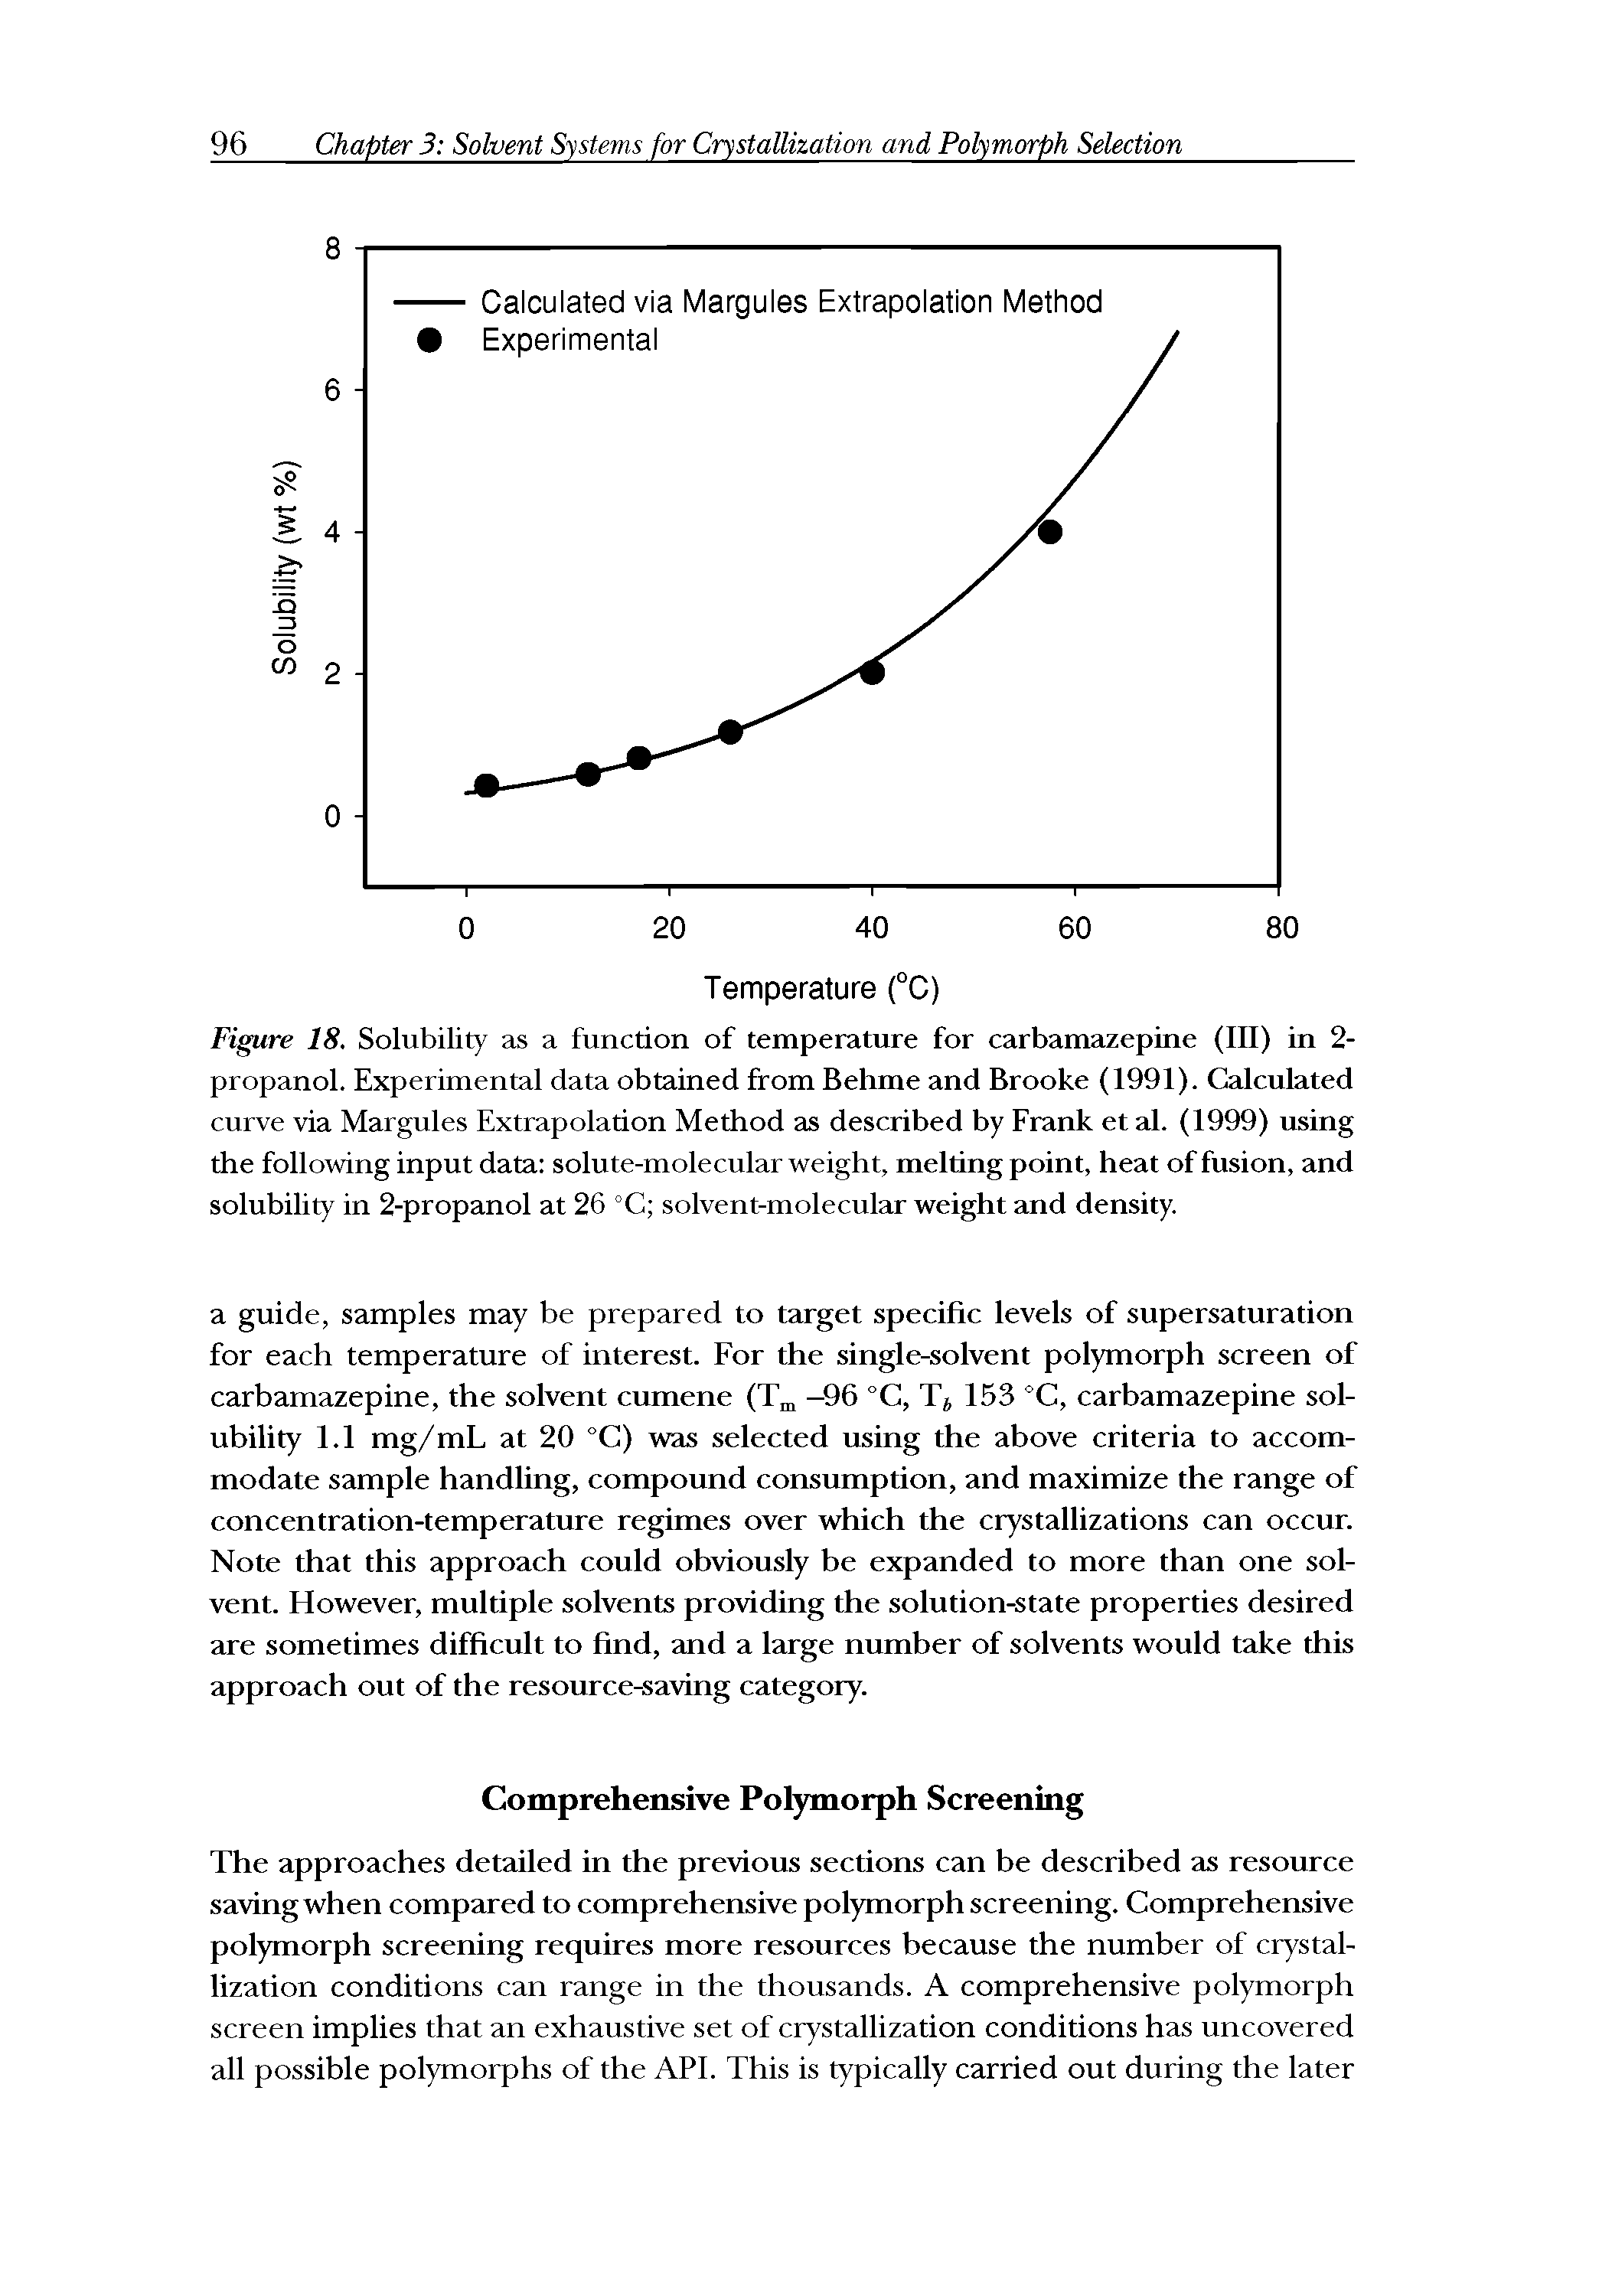 Figure 18. Solubility as a function of temperature for carbamazeprne (III) in 2-propanol. Experimental data obtained from Behme and Brooke (1991). Calculated curve via Margules Extrapolation Method as described by Frank et al. (1999) using the following input data solute-molecular weight, melting point, heat of fusion, and solubility in 2-propanol at 26 °C solvent-molecular weight and density.